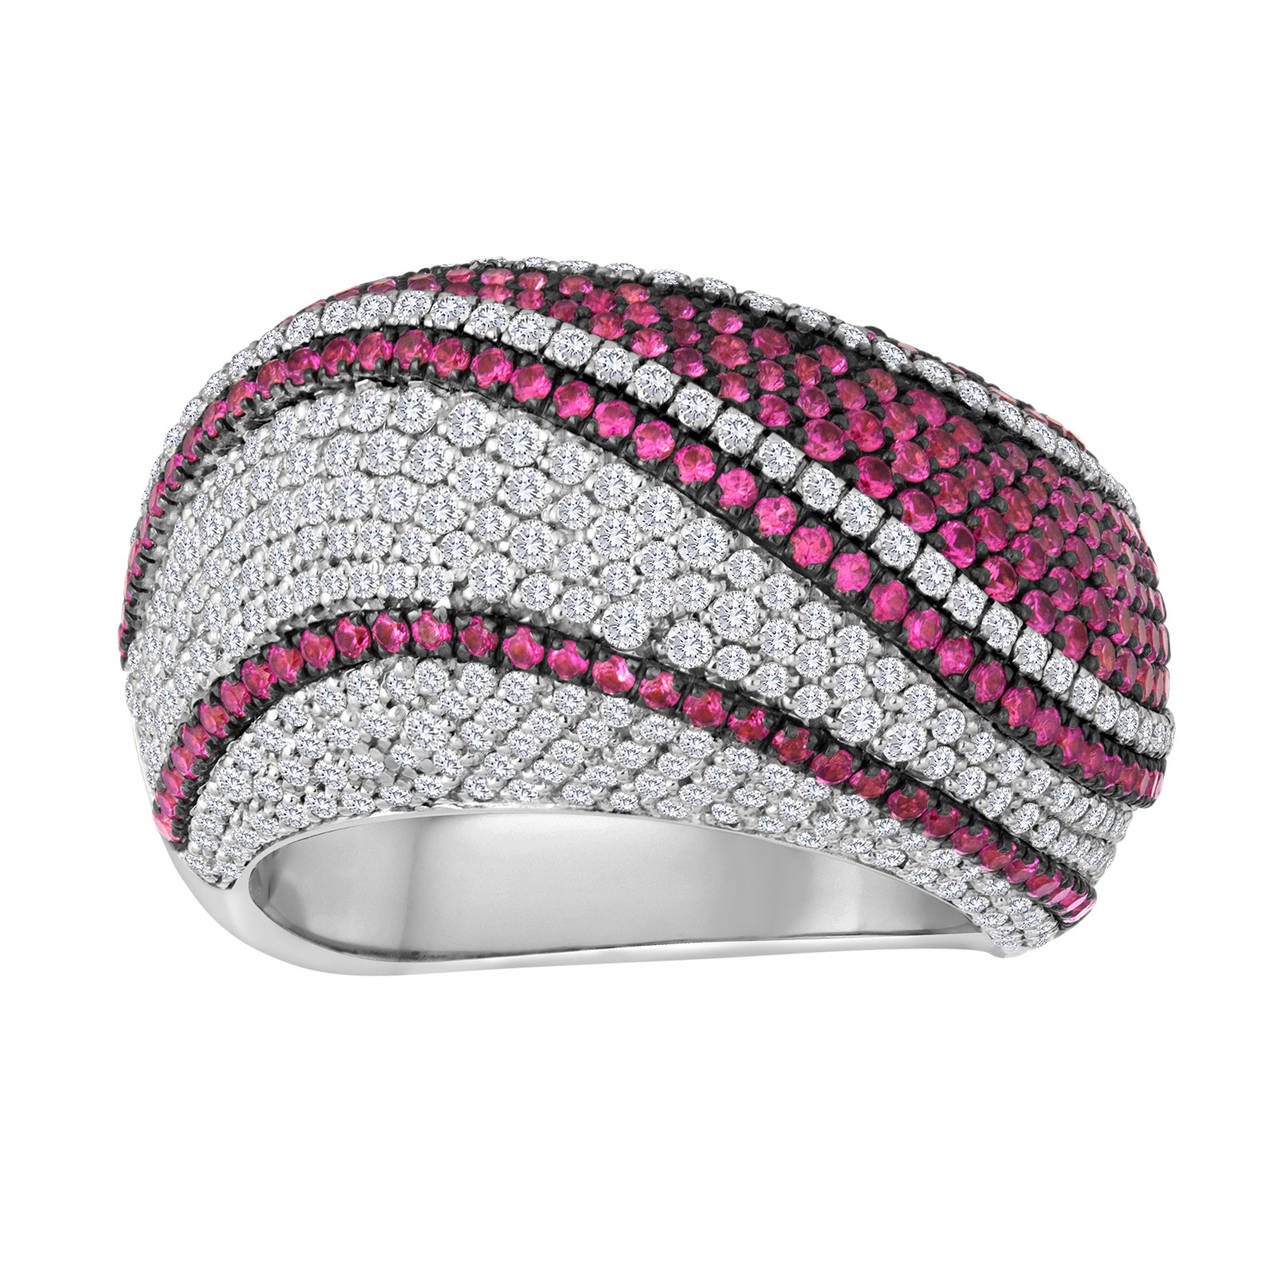 This piece consists of multiple rows of rubies and white diamonds, arranged in an elegant wave-like pattern. The total weight of the sapphires is 1.43 cts. The total weight of the diamonds is 1.25 cts.  All stones are pave set in 18k white gold.